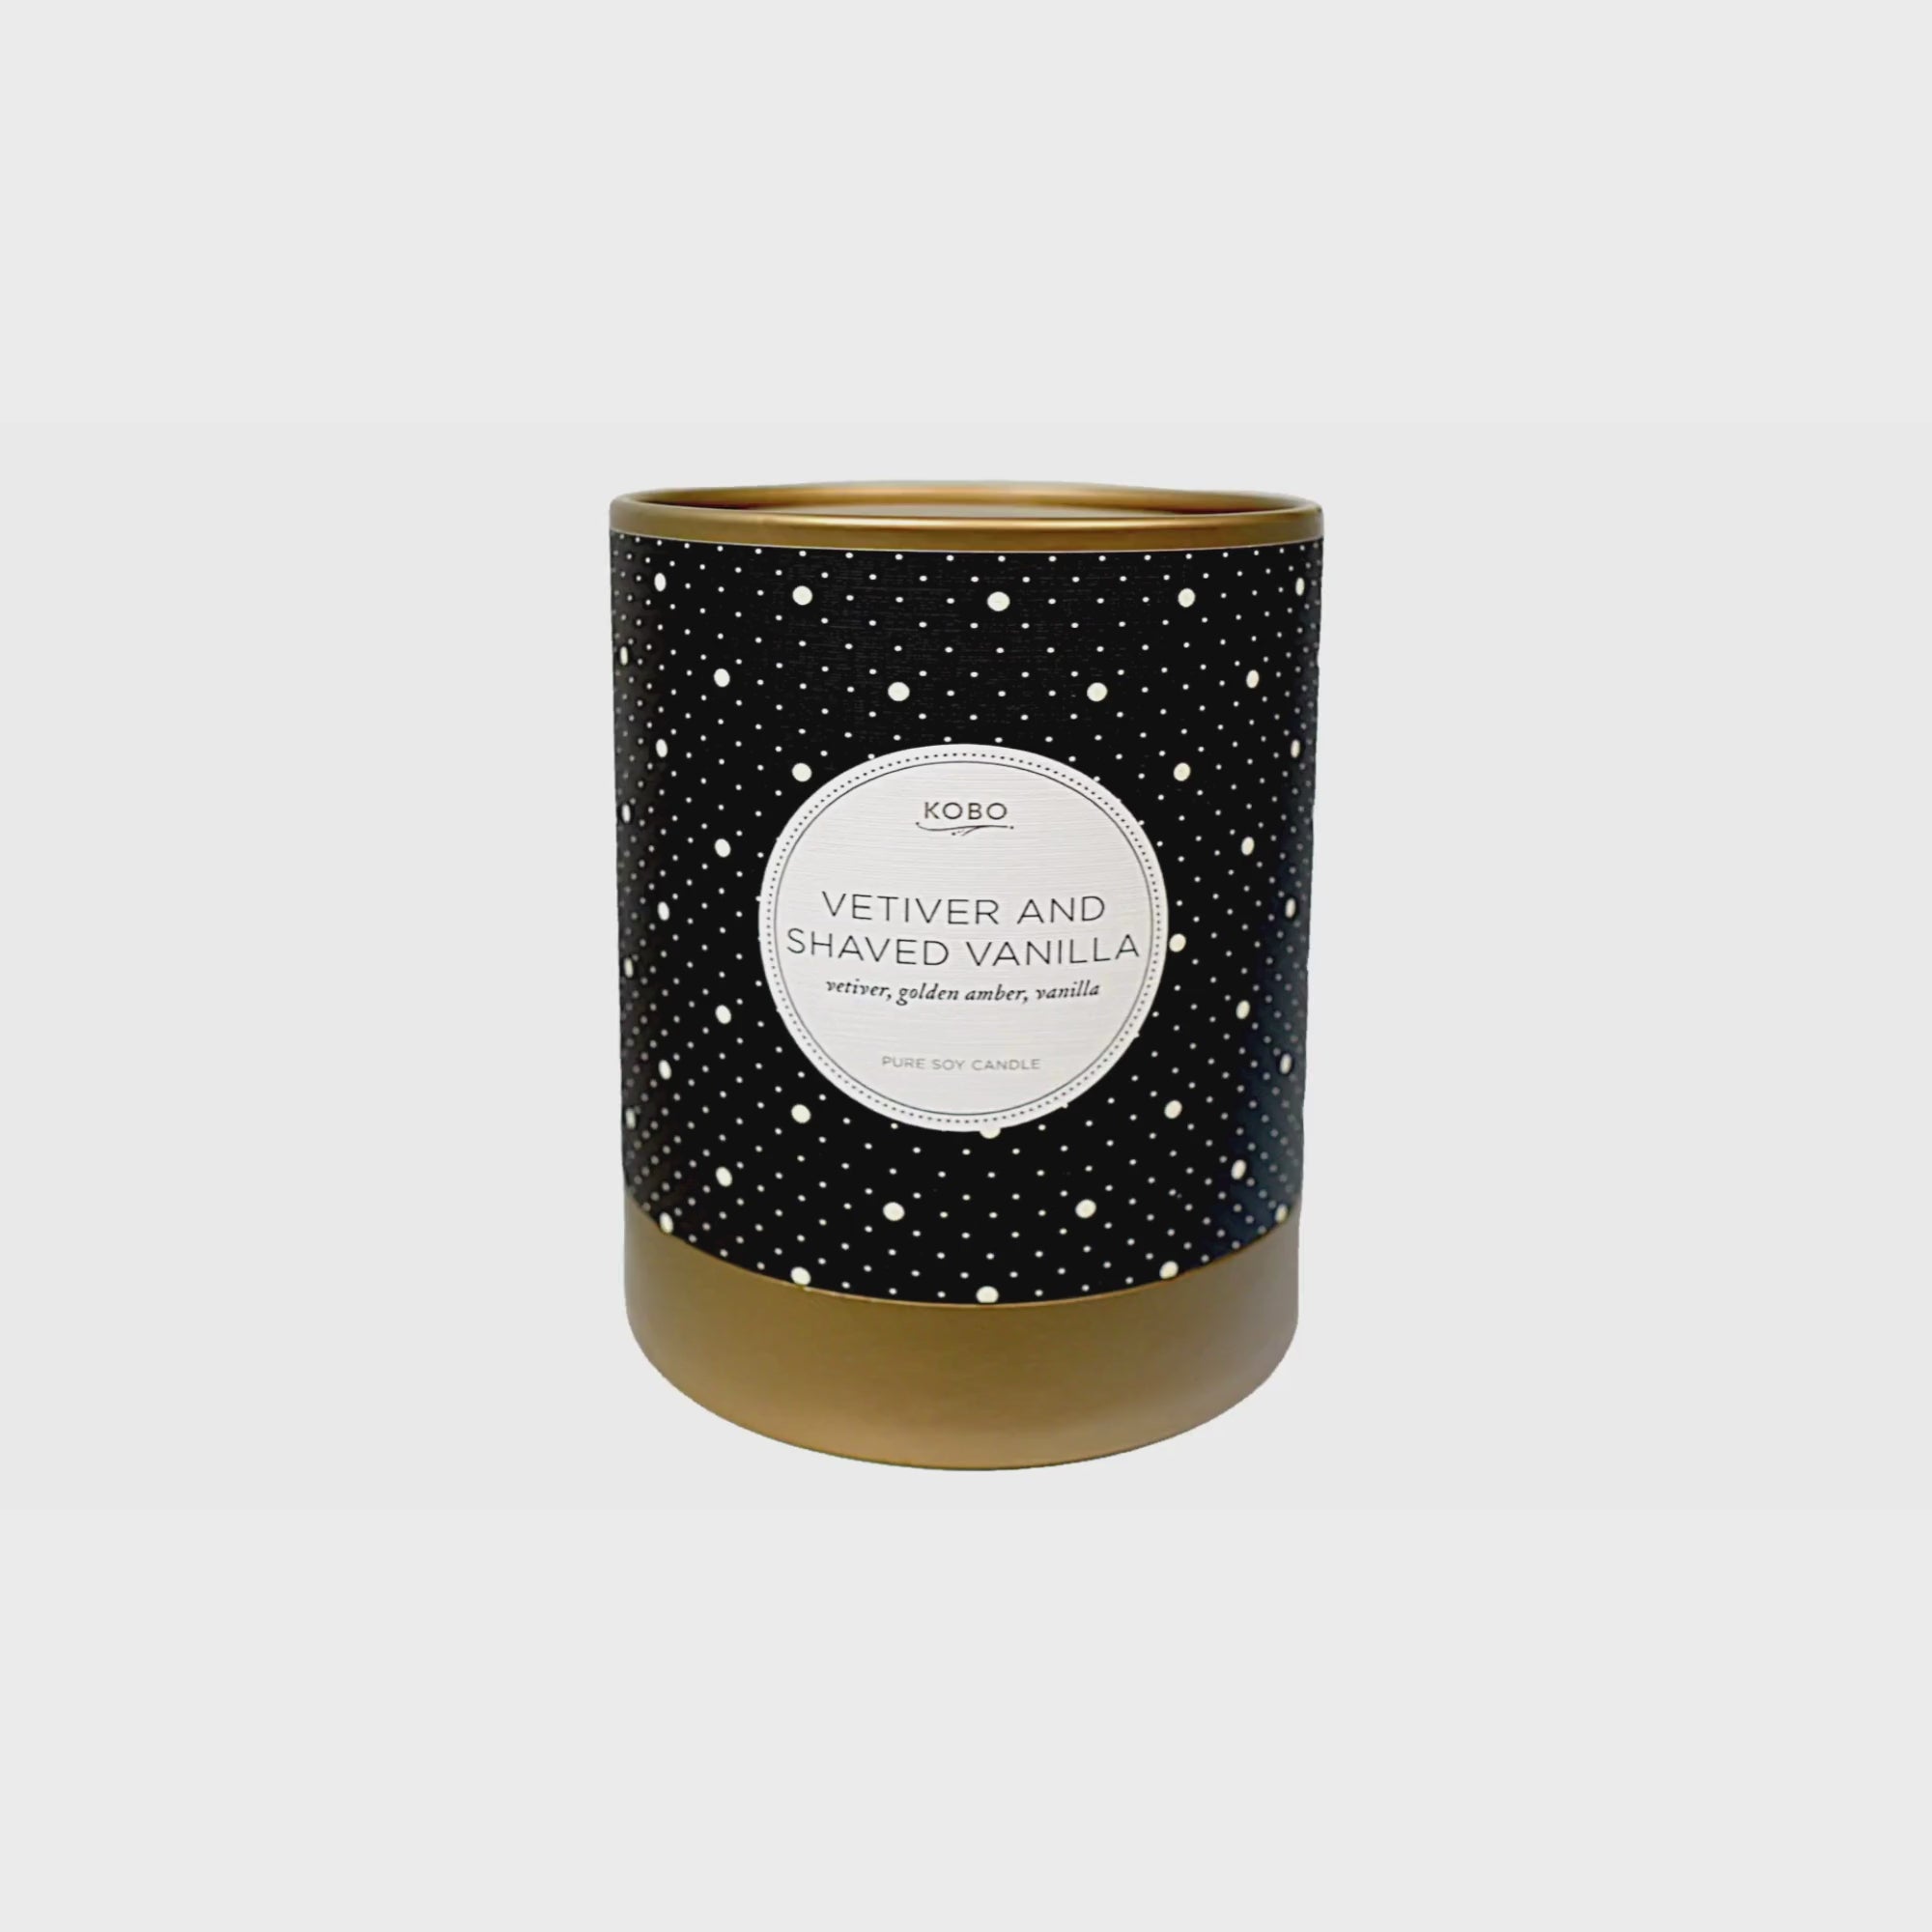 Alternate Image of Vetiver + Shaved Vanilla Coterie Candle